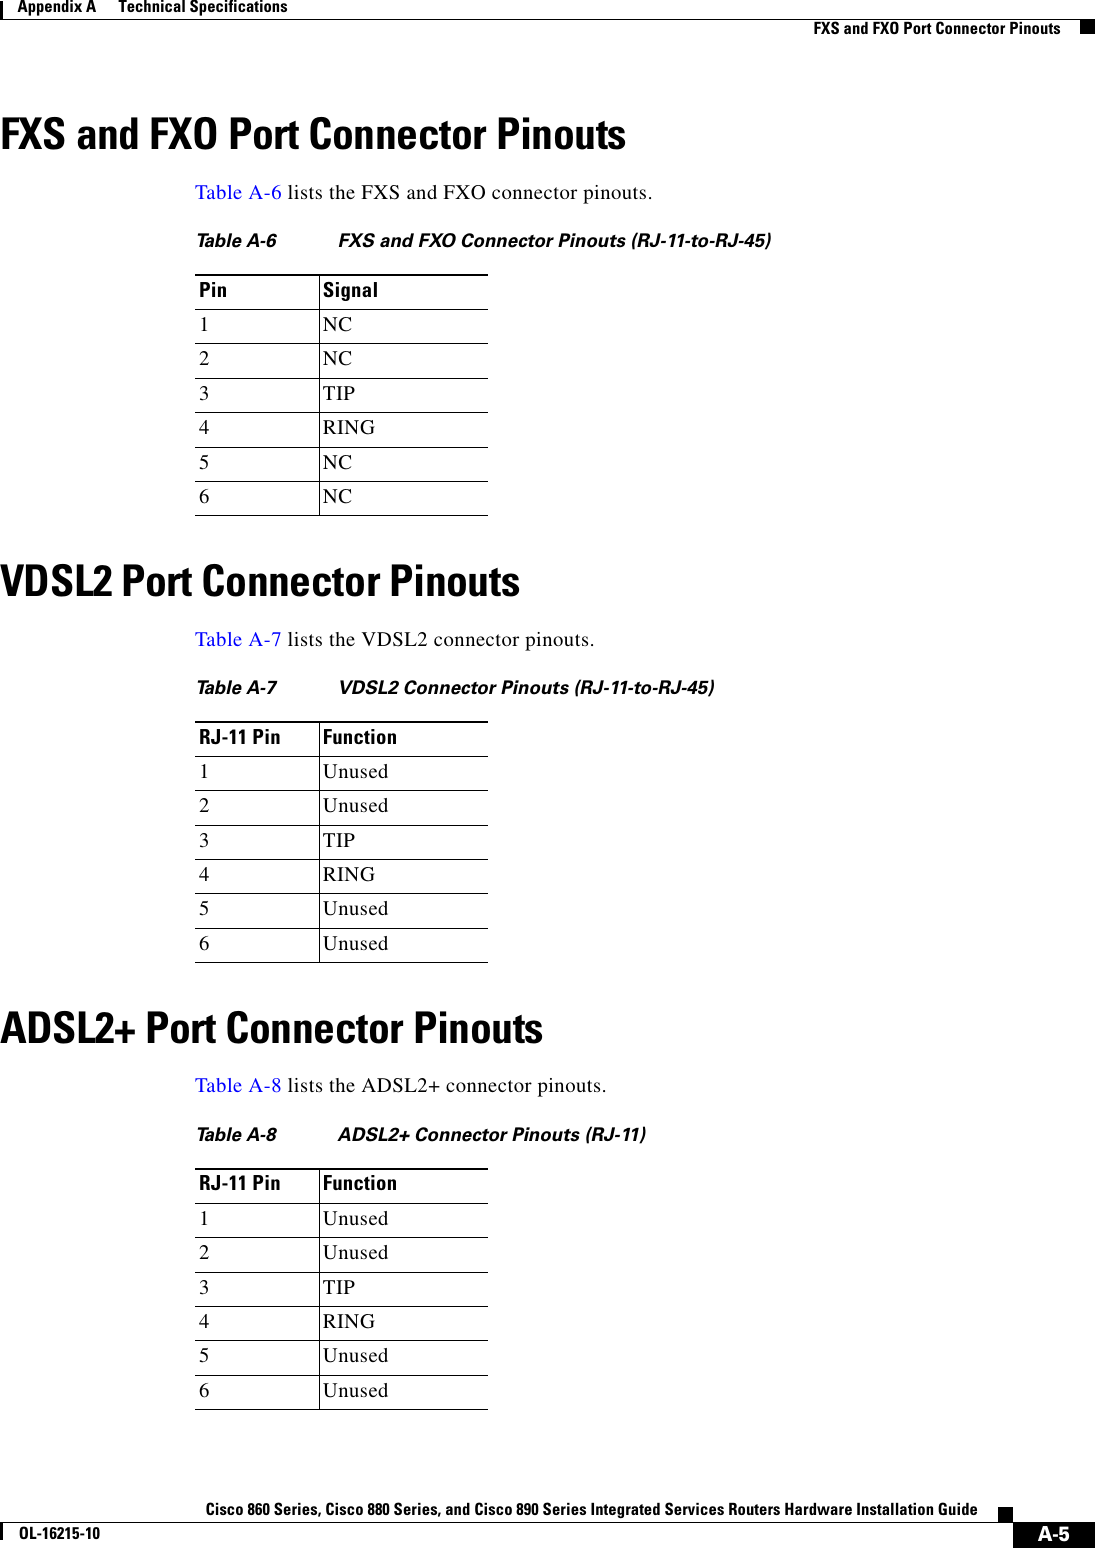  A-1Cisco 860 Series, Cisco 880 Series, and Cisco 890 Series Integrated Services Routers Hardware Installation GuideOL-16215-10APPENDIXATechnical SpecificationsThis appendix provides router, port, and cabling specifications for the Cisco 860 series, Cisco 880 series, and Cisco 890 series Integrated Services Routers (ISRs). It contains the following sections:  • Router Specifications, page A-2  • Wireless Access Point, page A-3  • FE and GE Port Pinouts, page A-3  • Console and Auxiliary Port Connector Pinouts, page A-4  • FXS and FXO Port Connector Pinouts, page A-5  • VDSL2 Port Connector Pinouts, page A-5  • ADSL2+ Port Connector Pinouts, page A-5  • V.92 Port Connector Pinouts, page A-6  • G.SHDSL Port Connector Pinouts, page A-6  • Data BRI Port Connector Pinouts, page A-7  • Voice ISDN BRI Interface Pin Numbers and Functions, page A-7  • SFP Port Connector Pinouts, page A-8  • Cable Specifications, page A-8WarningUltimate disposal of this product should be handled according to all national laws and regulations. Statement 1040Note For compliance and safety information, see Regulatory Compliance and Safety Information Roadmap that was shipped with the router and Regulatory Compliance and Safety Information for Cisco 800 Series and SOHO Series Routers.Note The product has some color variation on the Power Pin. This will not impact product performance or reliability.